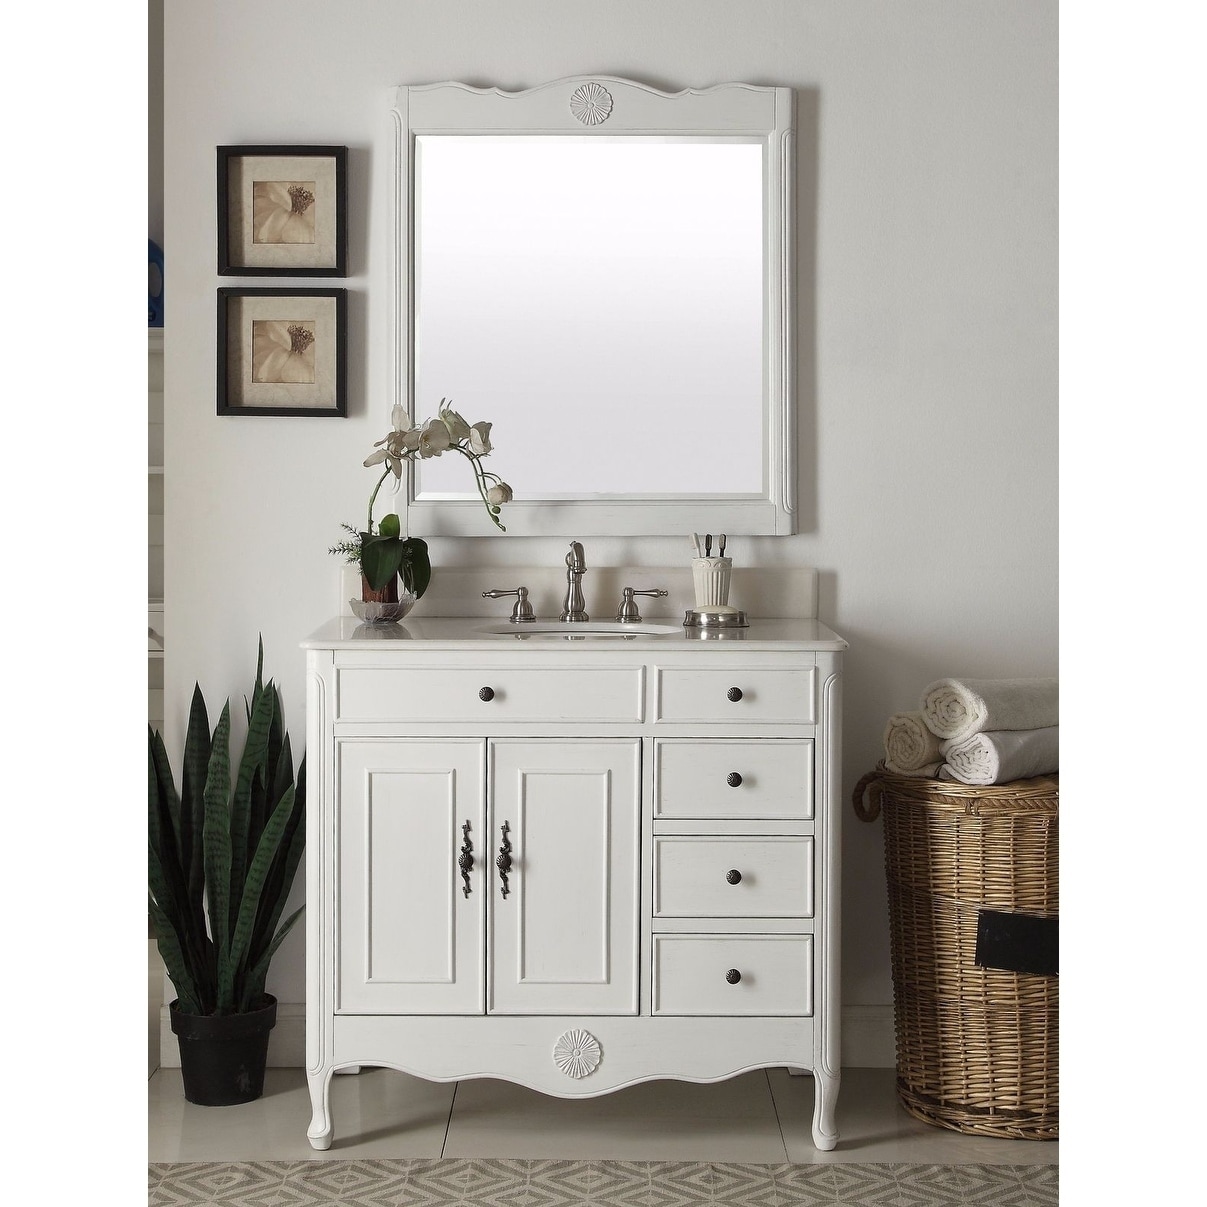 Modetti Provence 38 Inch Single Sink Bathroom Vanity With Marble Top Overstock 24030999